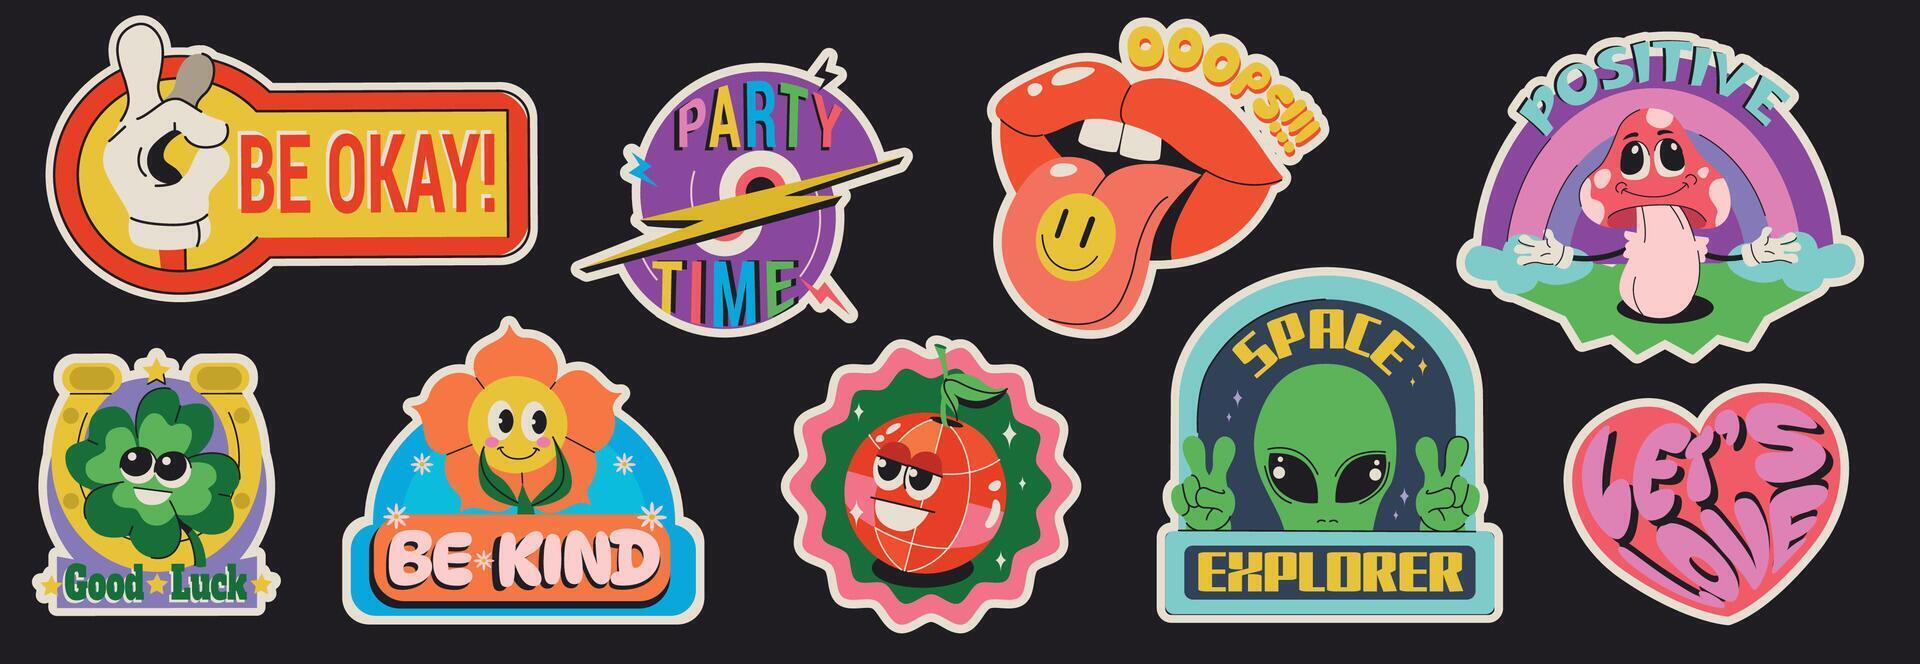 Retro stickers or labels set with flower, okay hand gesture, love symbol, positive mushroom, alien and mouth. Groovy hippie icons, funny comic characters. Tag or badge design in trendy style vector